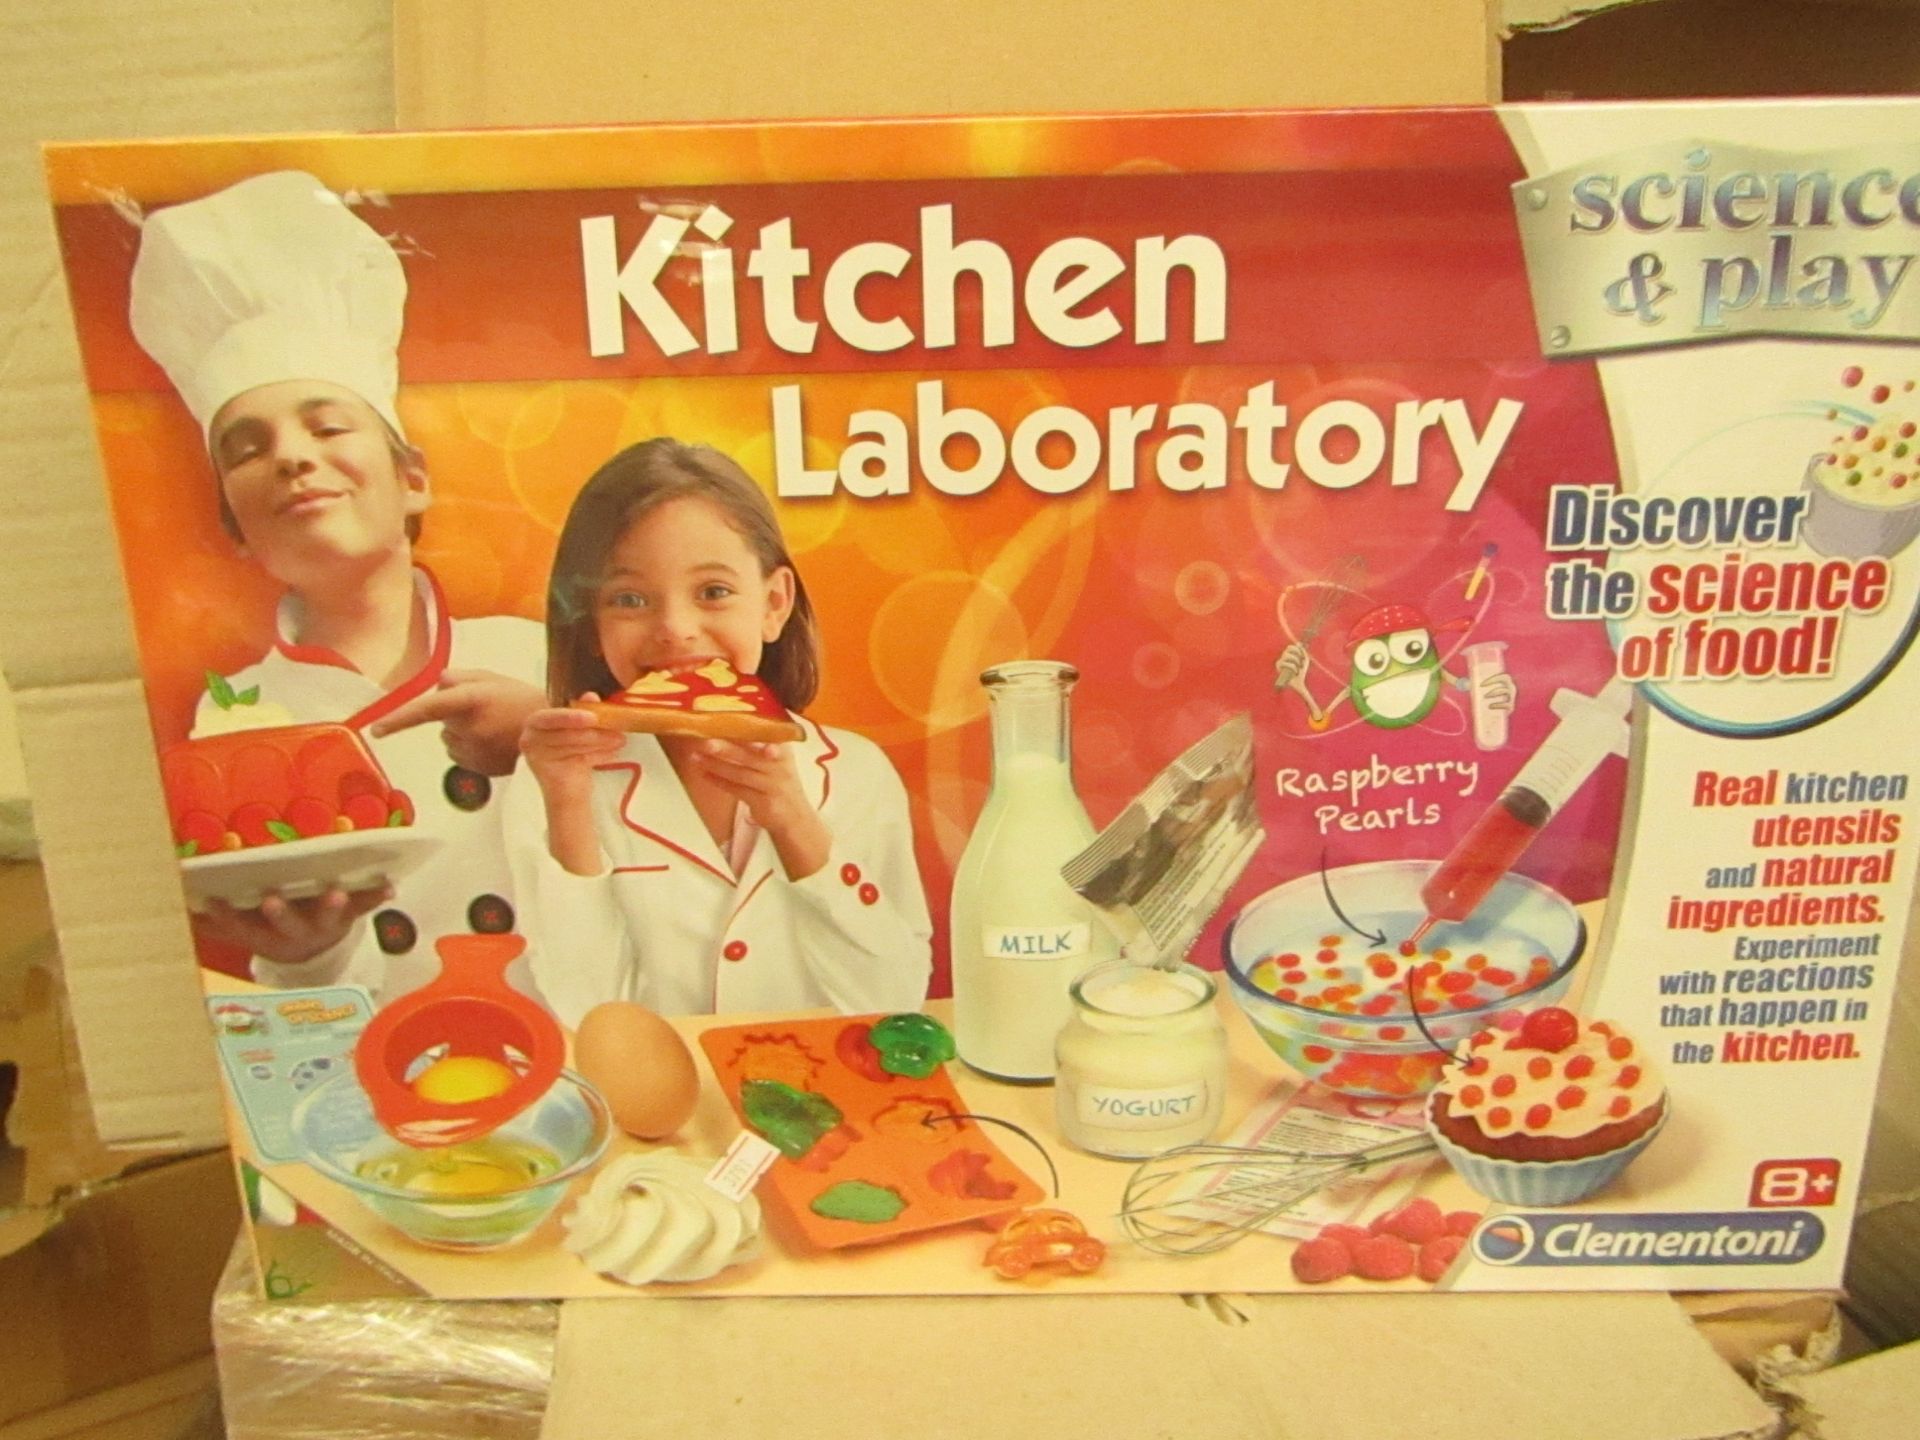 Clementoni Science & Play Kitchen Laboratory. New in a Sealed Box